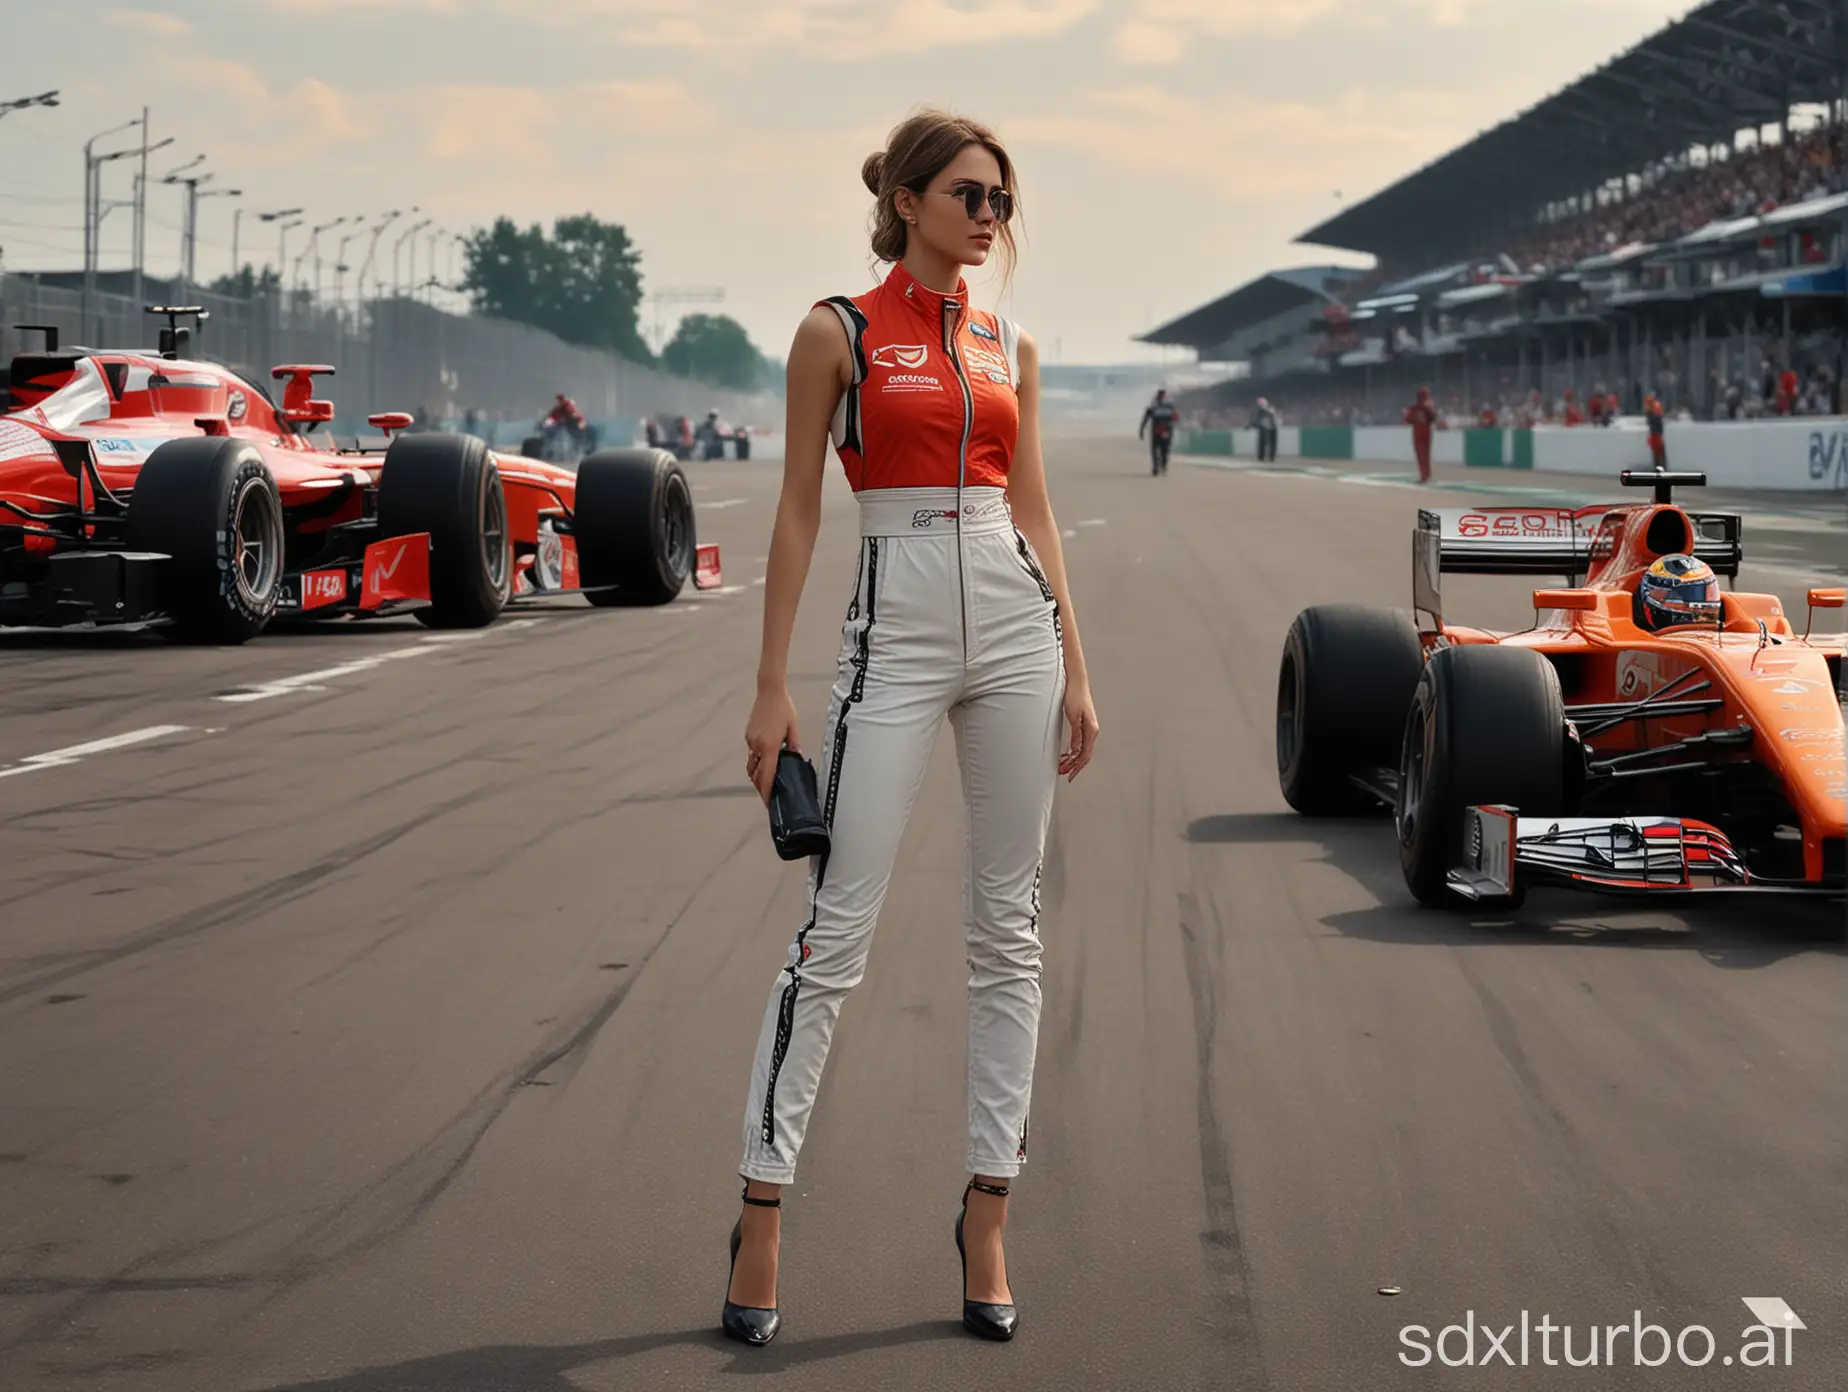 please draw a beautiful full-length fashion girl emotionally talking to the racer in against the background of a bolid formula-1